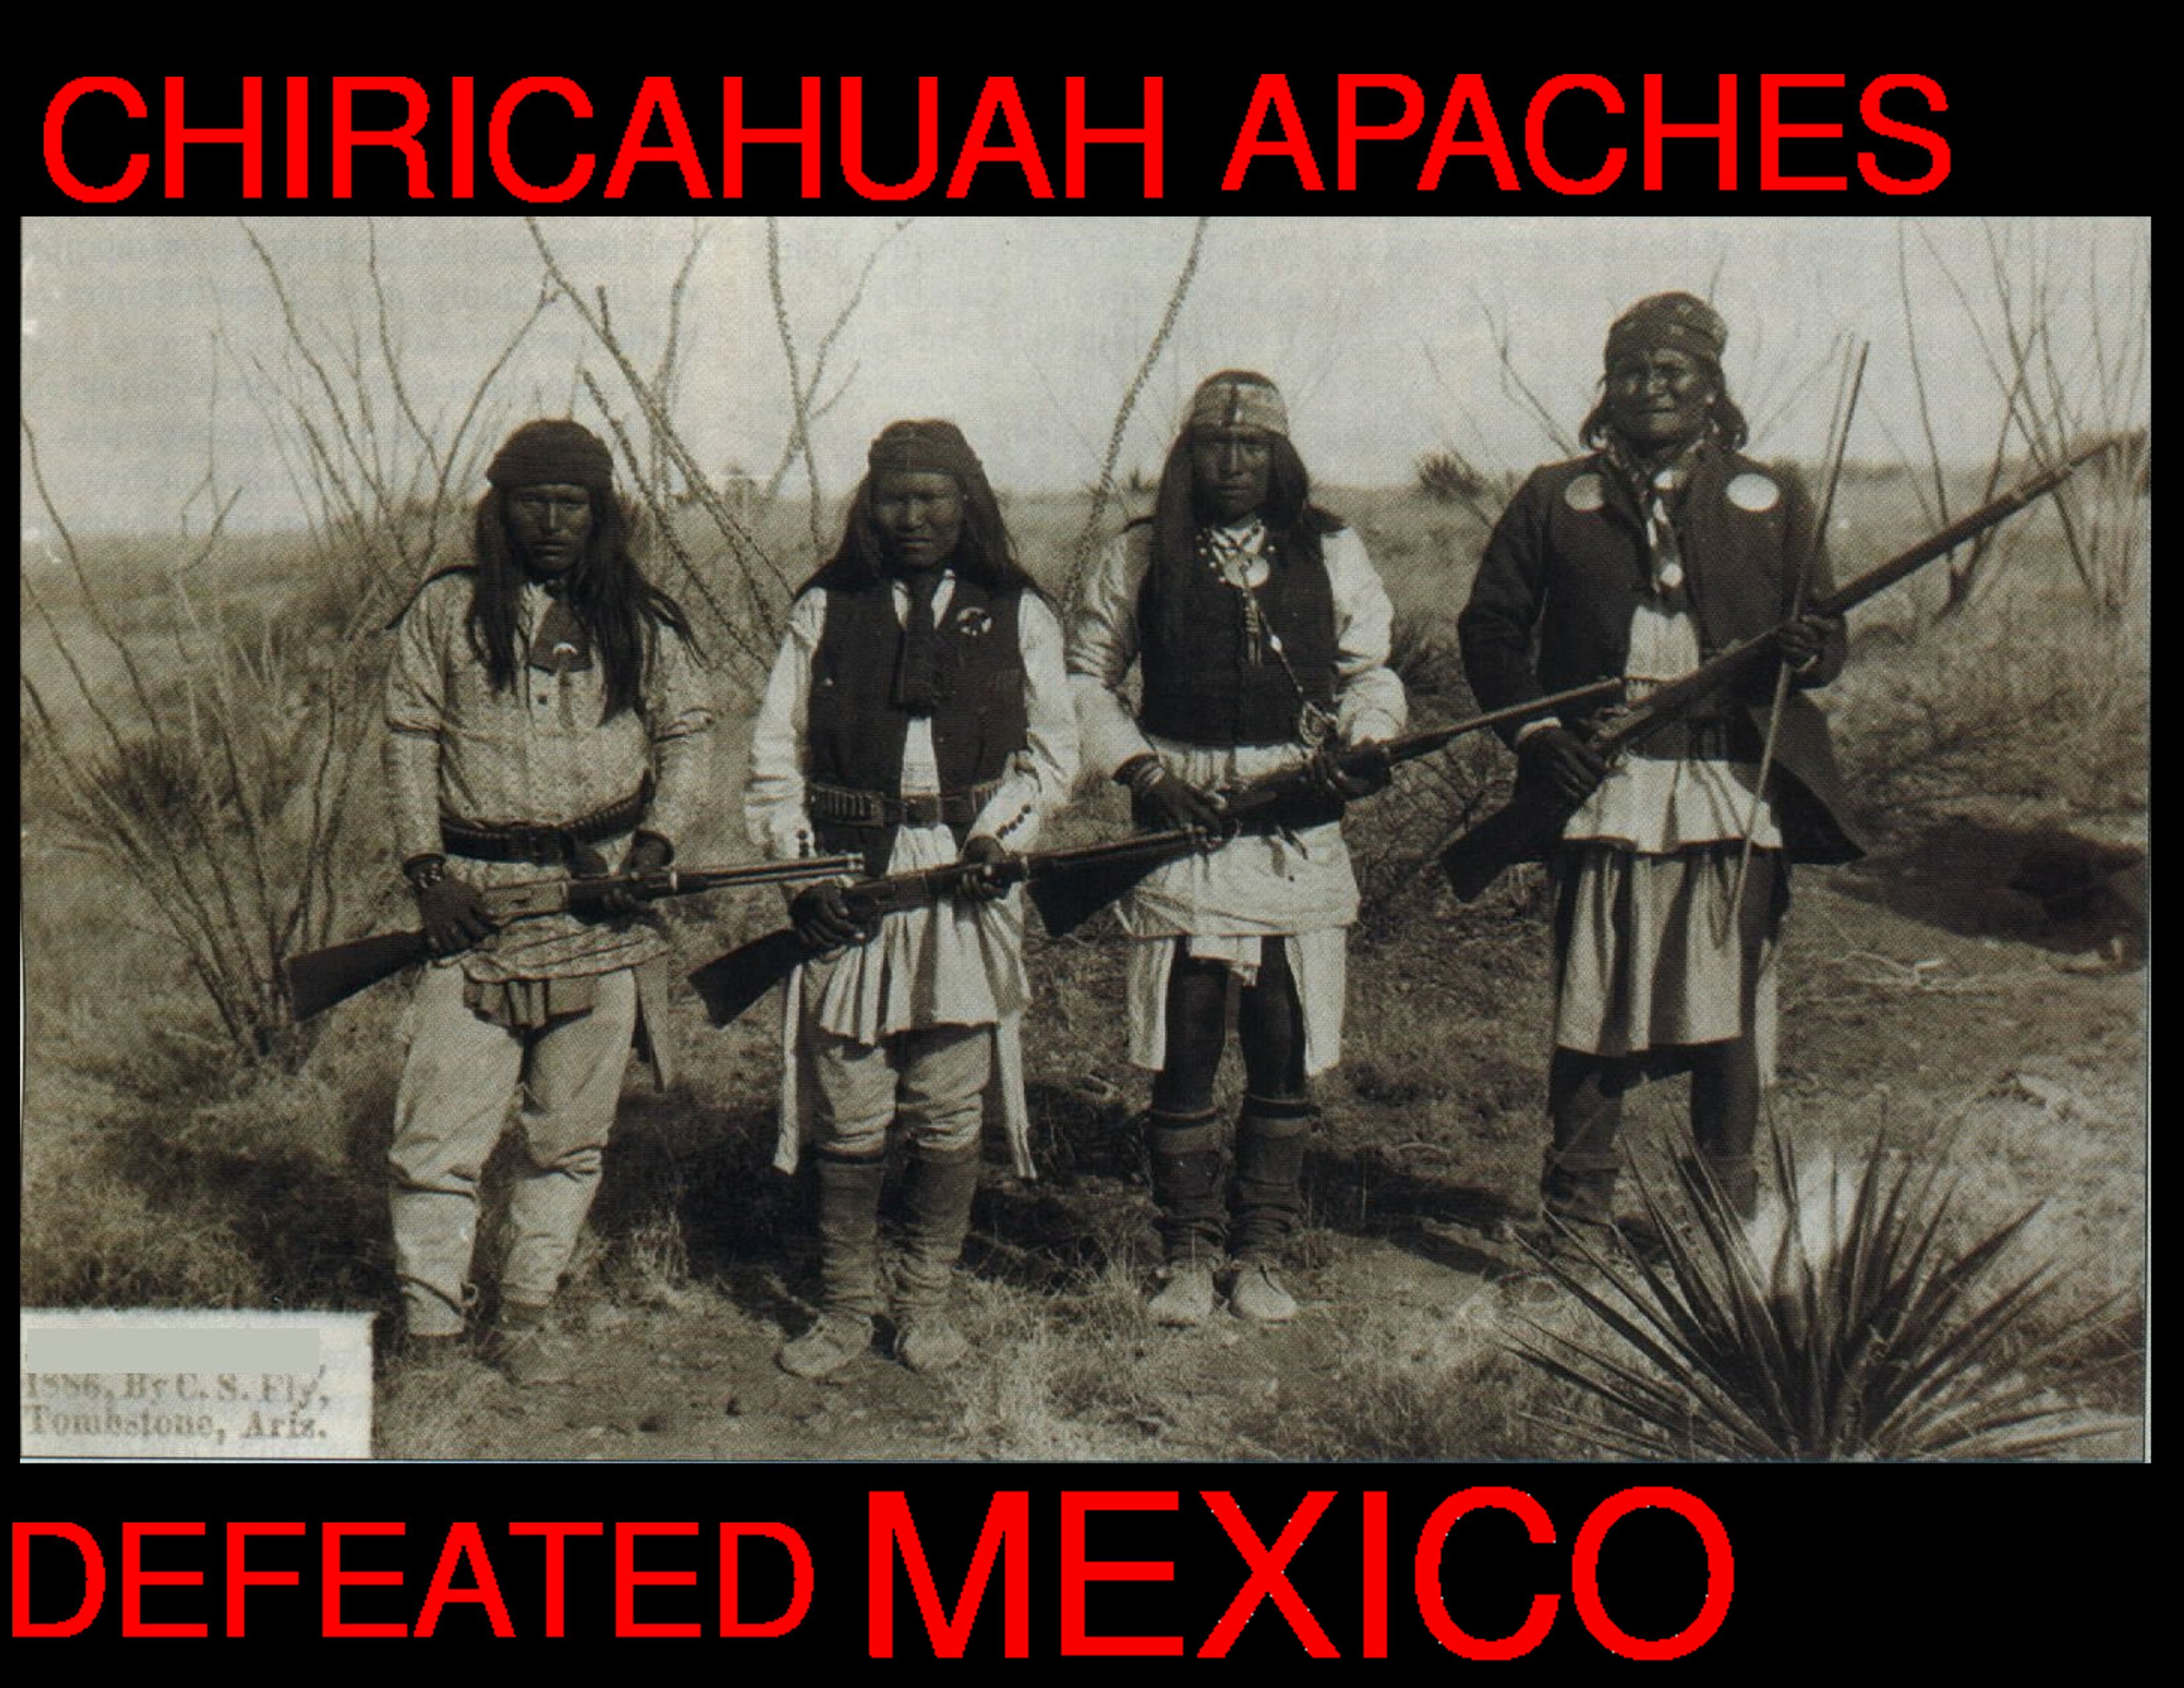 CHIRICAHUAS DEFEATED MEXICANS